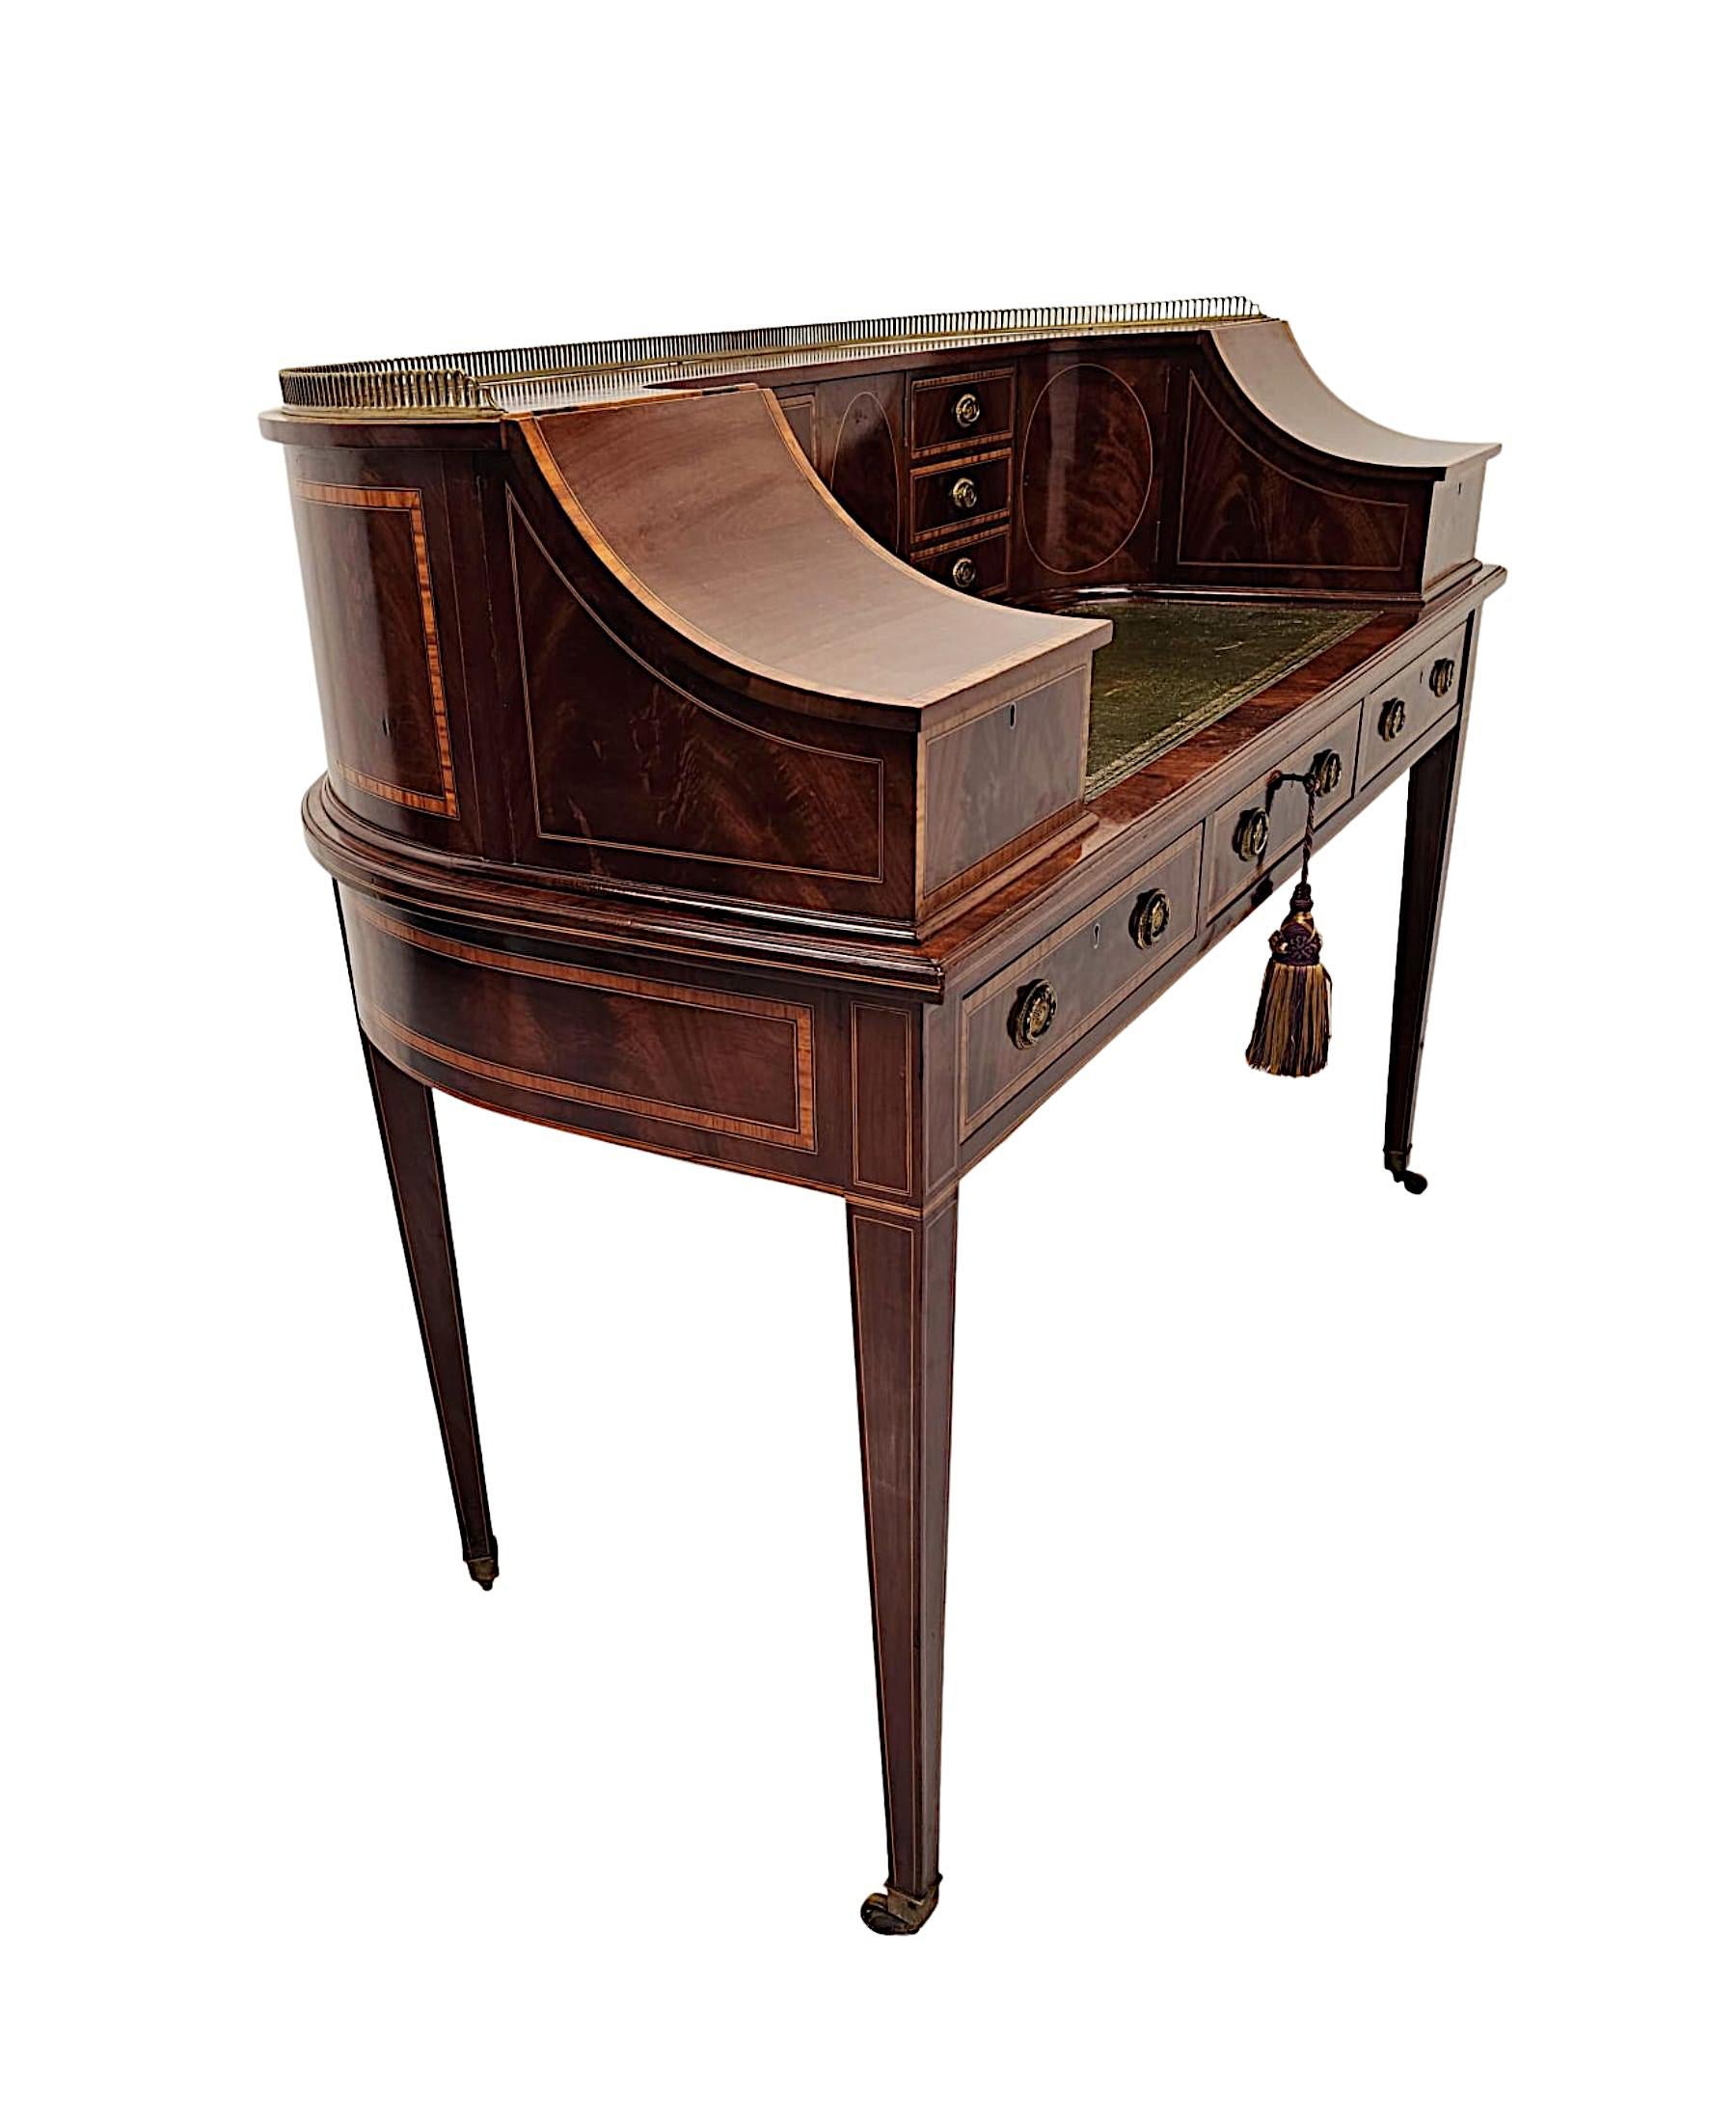 A very fine Edwardian richly patinated and beautifully figured mahogany Carlton House style desk of exceptional quality, stunningly carved with delicate line inlay and fabulous crossbanded detail throughout.  The moulded and curved upper section